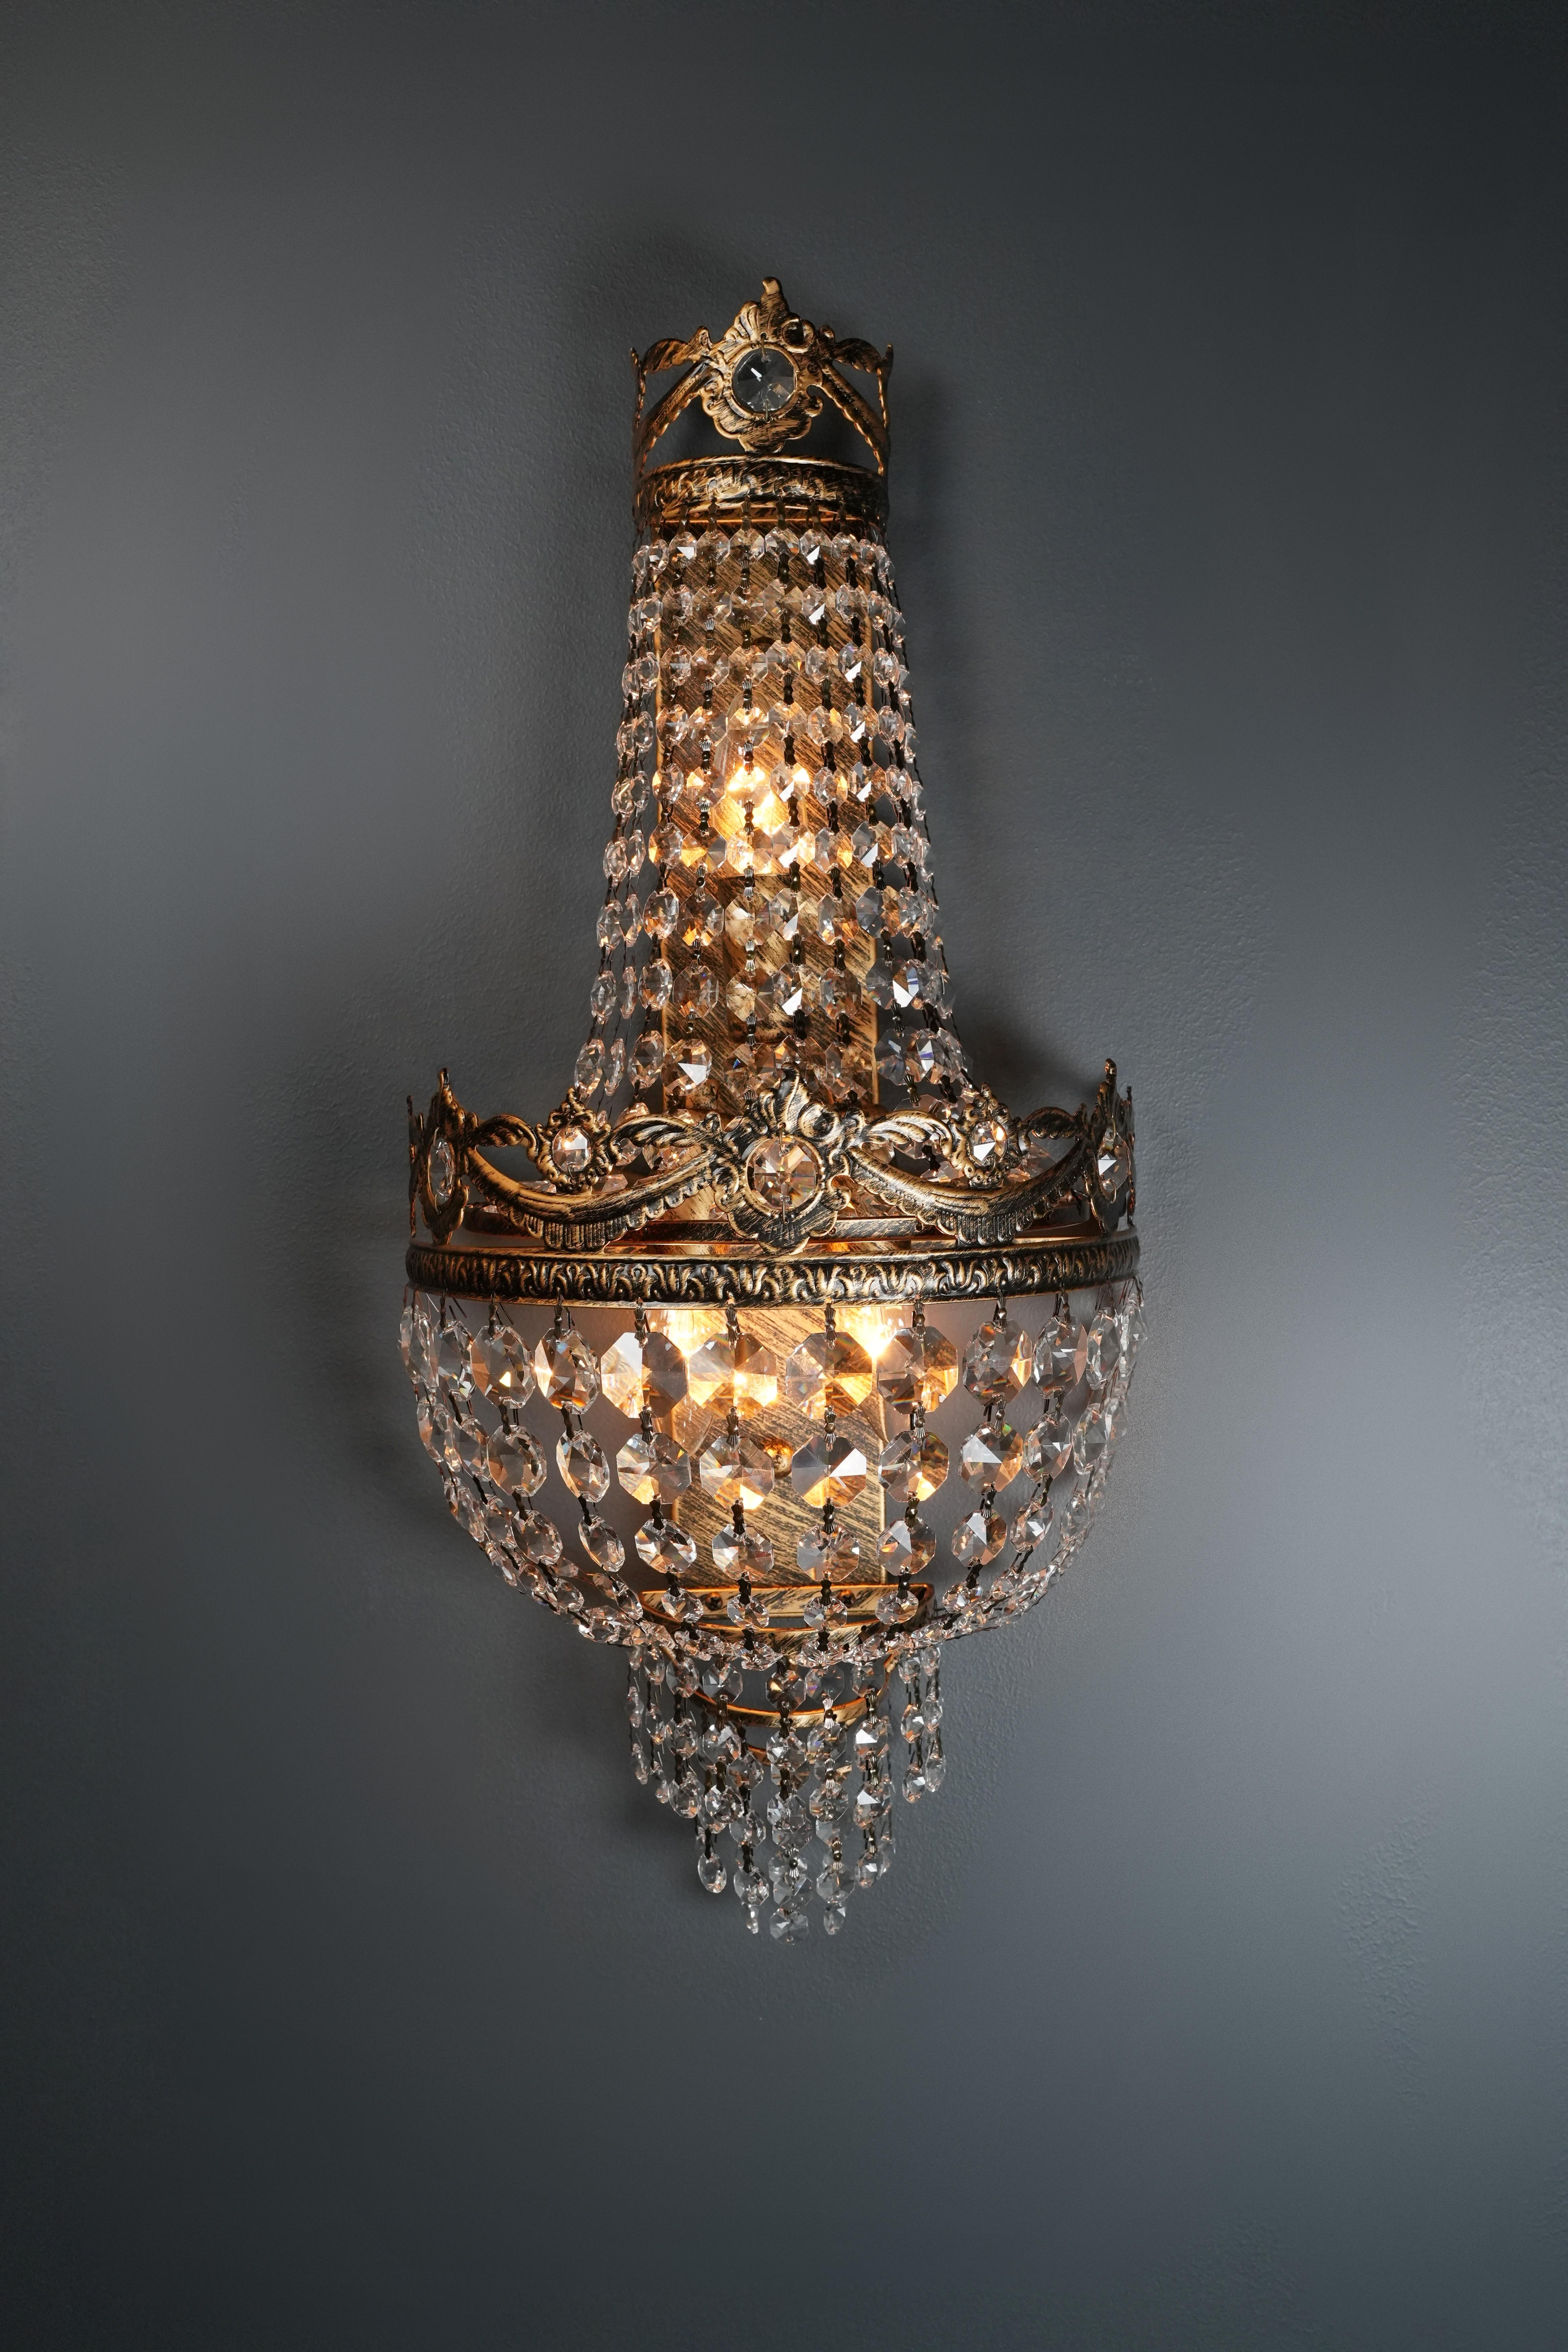 Immerse yourself in the elegance of bygone times with our exclusive antique-style wall lamp. This wall lamp is not only a stunning lighting object, but also a real work of art that brings the beauty of the ancient into the modern.

With a width of